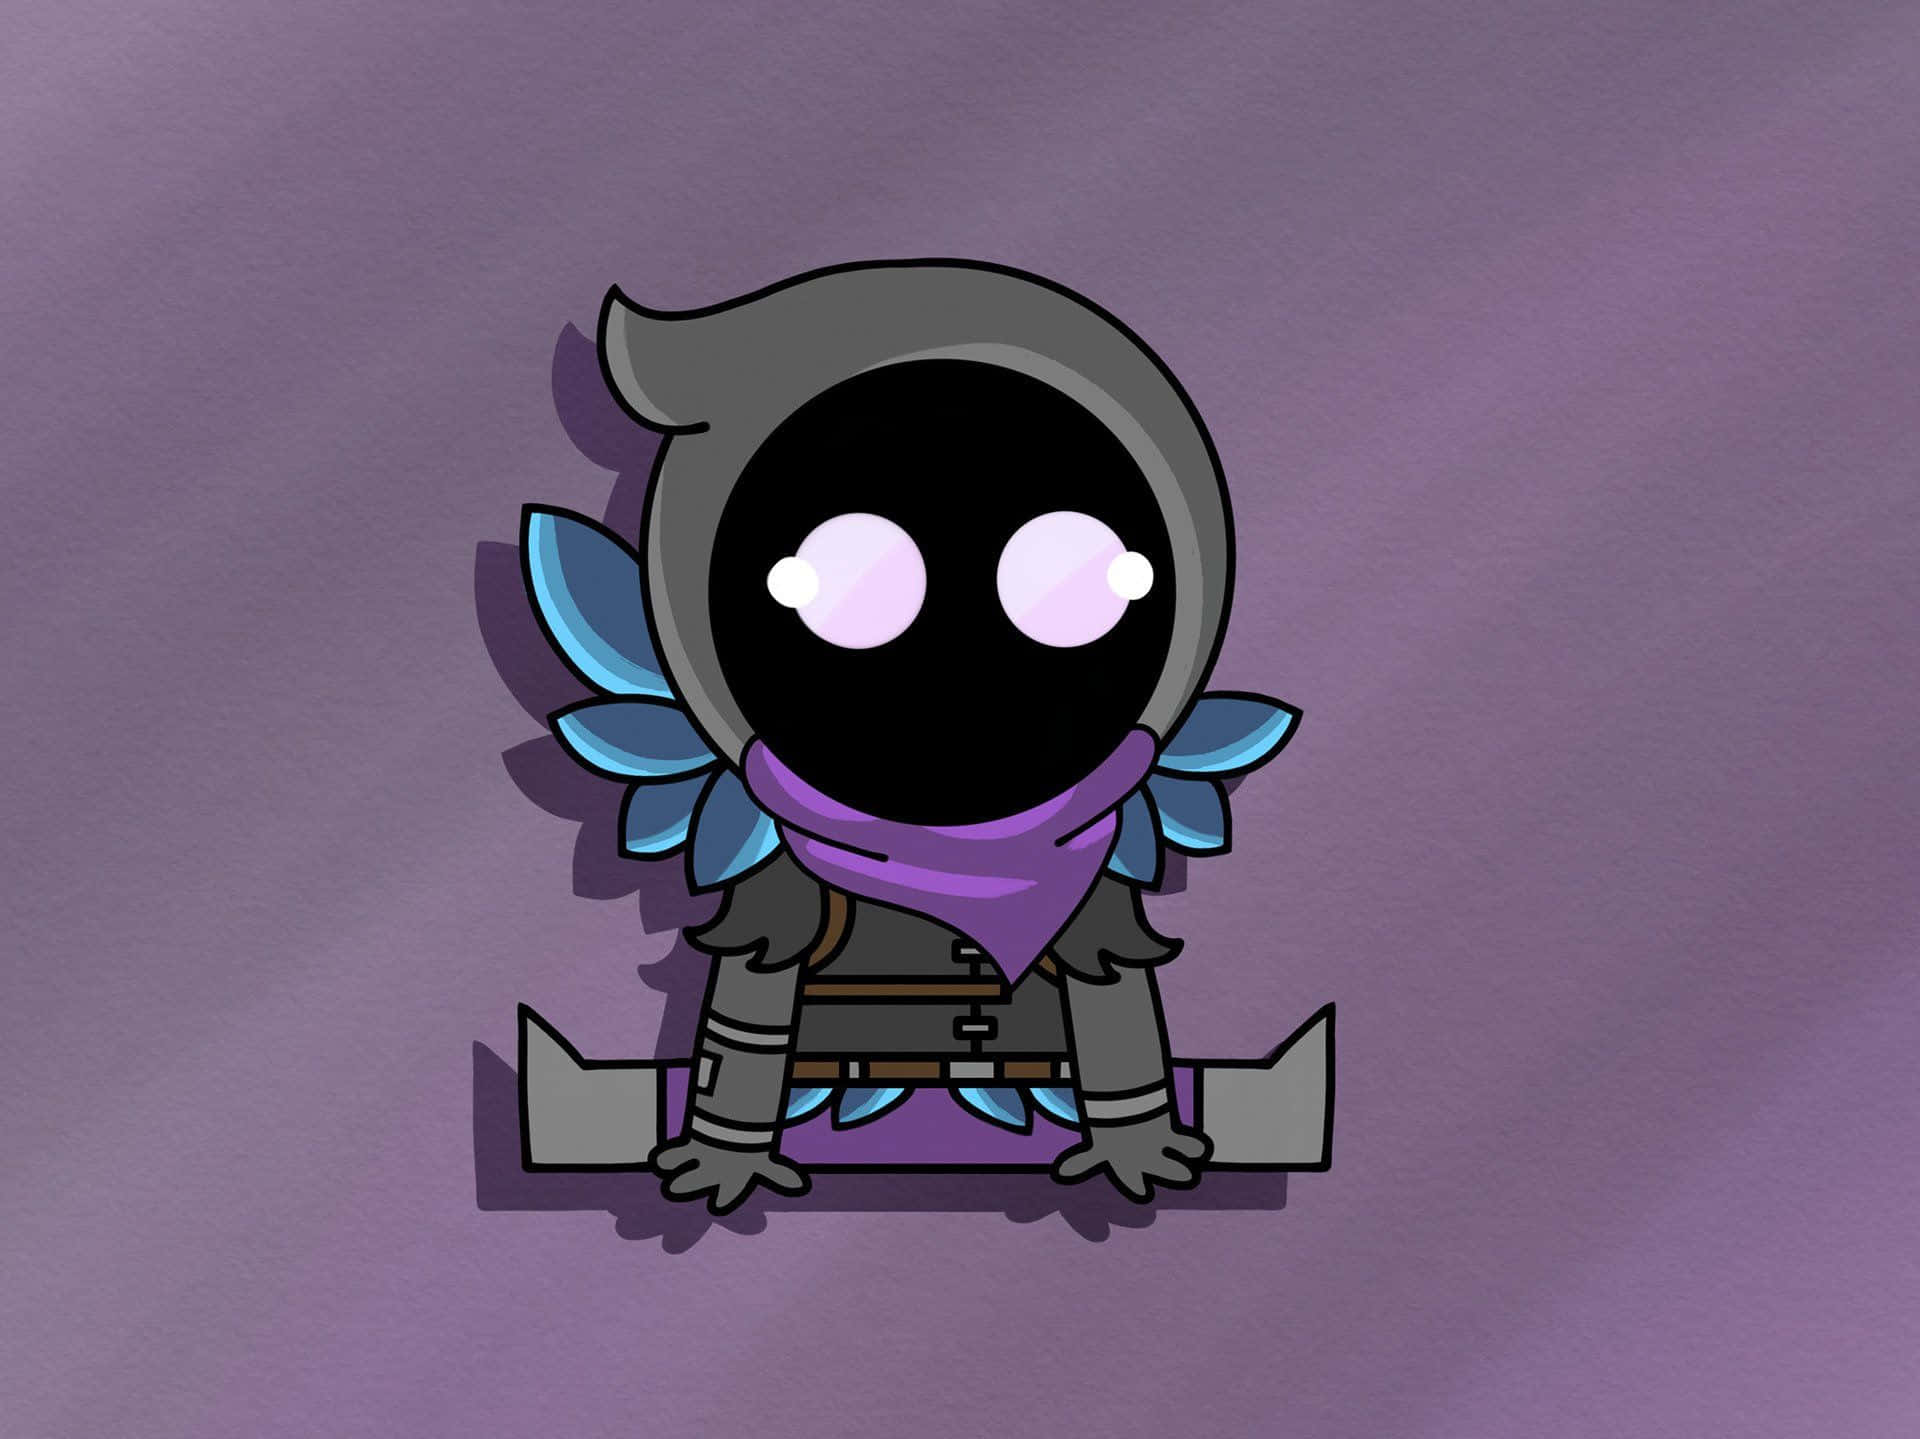 This Cute Fortnite character will brighten up your gaming experience. Wallpaper